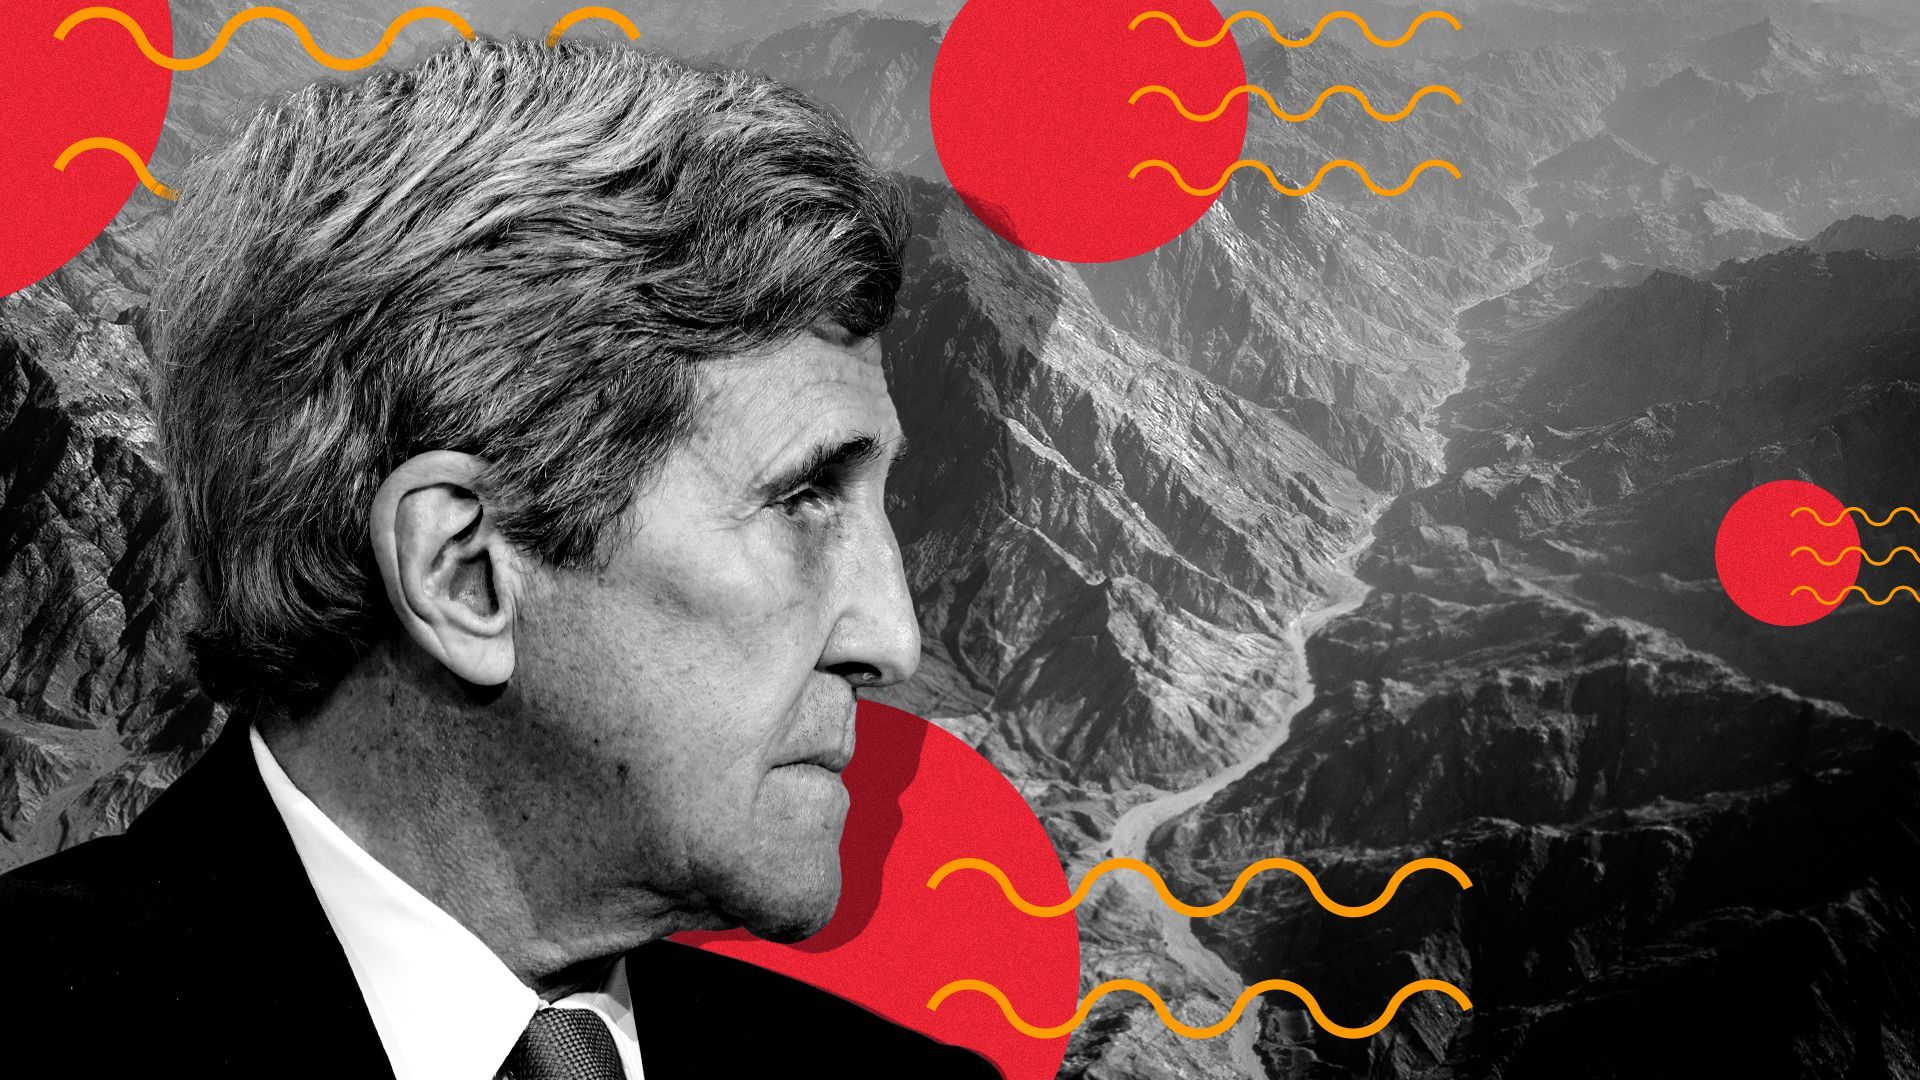 Photo illustration of John Kerry over an image of mountains in the Siani peninsula surrounded by abstract mailing shapes. 